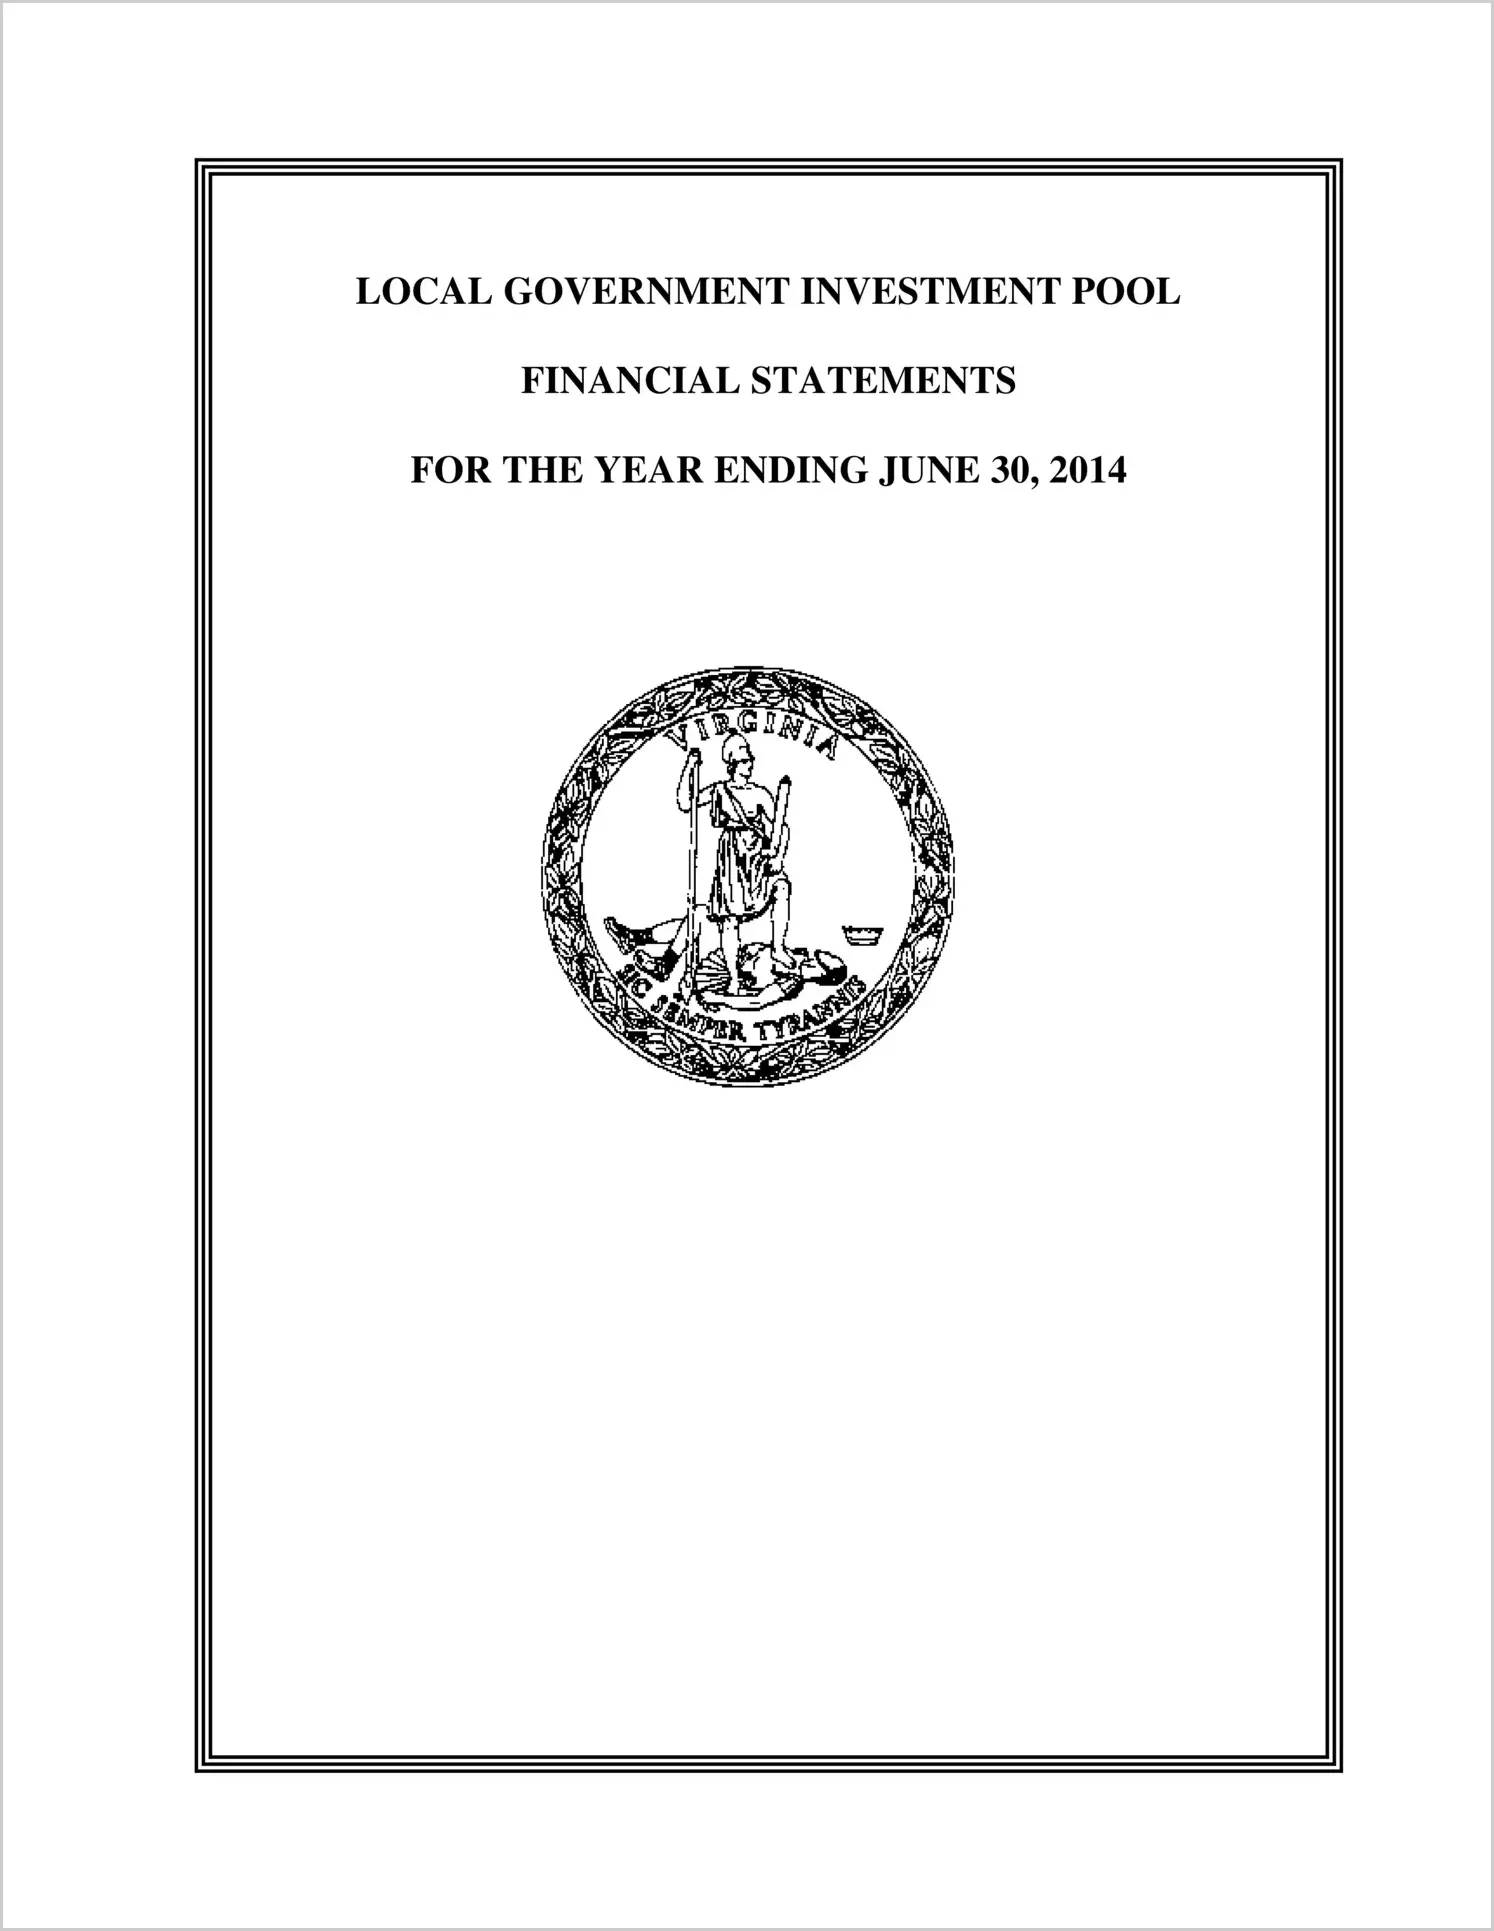 Local Government Investment Pool Financial Statements for the year ended June 30, 2014